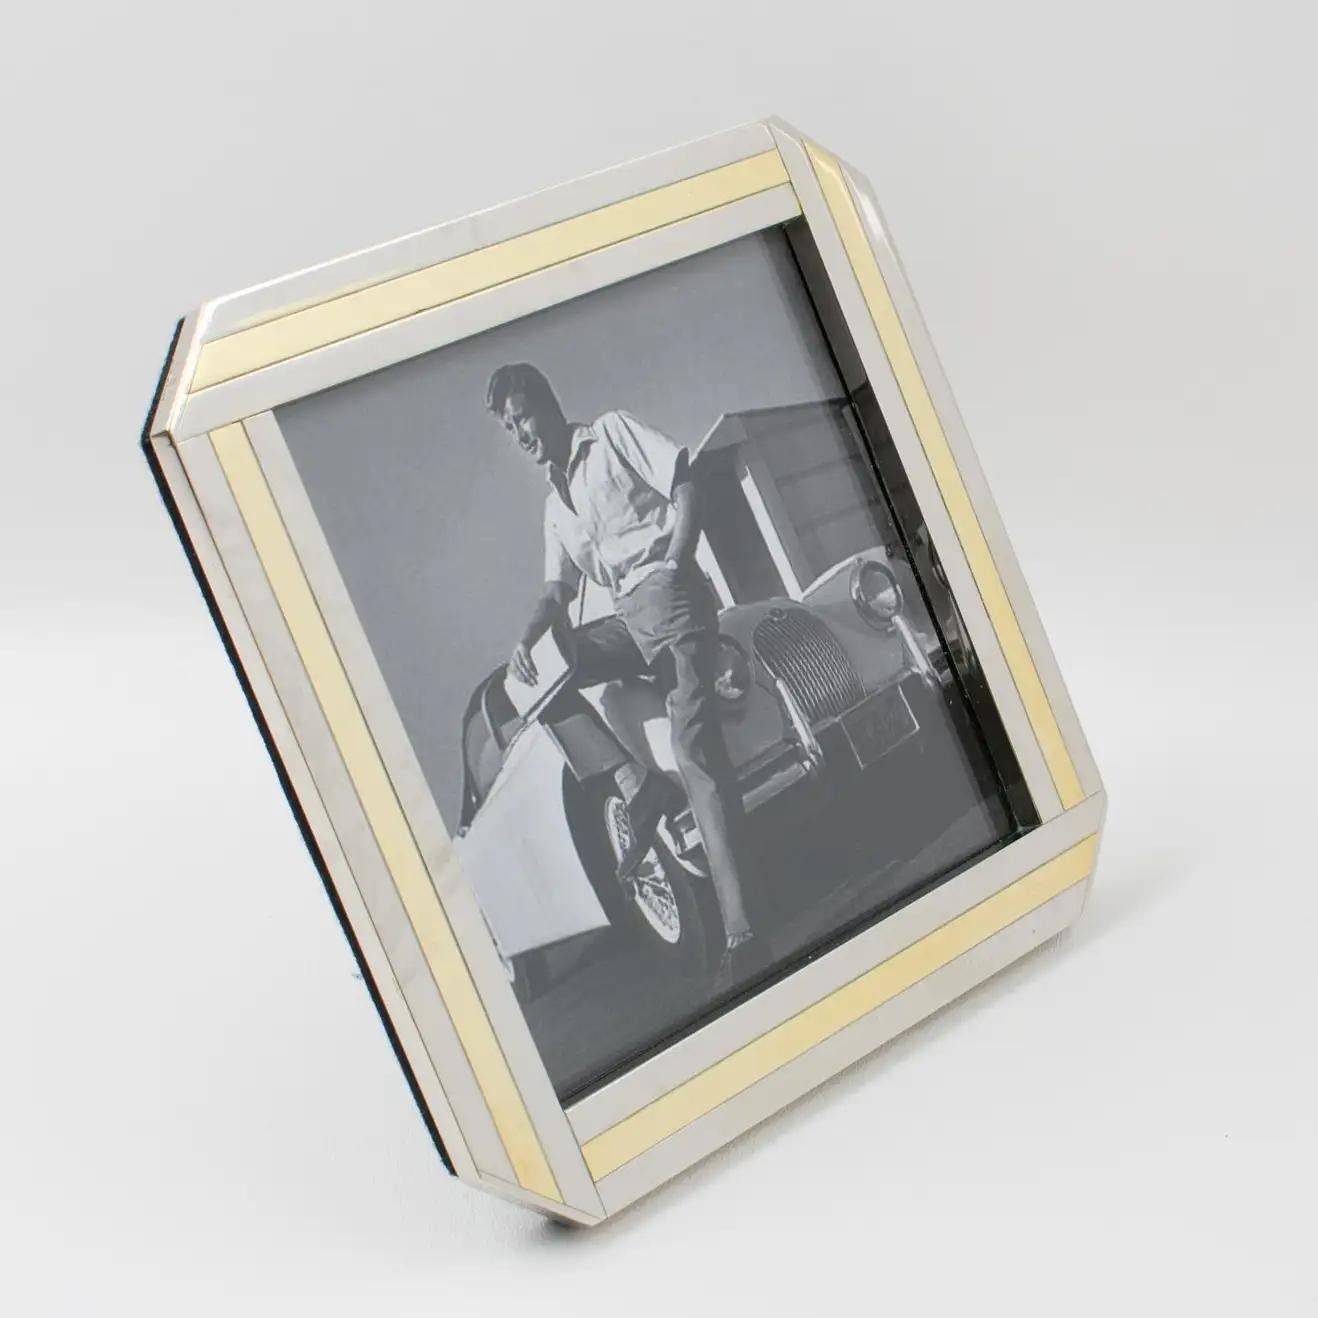 Italian designer A. Elle designed and crafted this stylish 1970s picture photo frame. The gilded brass and chrome geometric design has a Kinetic effect. The easel and back are in black felt, and the frame has a glass protection on the front. The